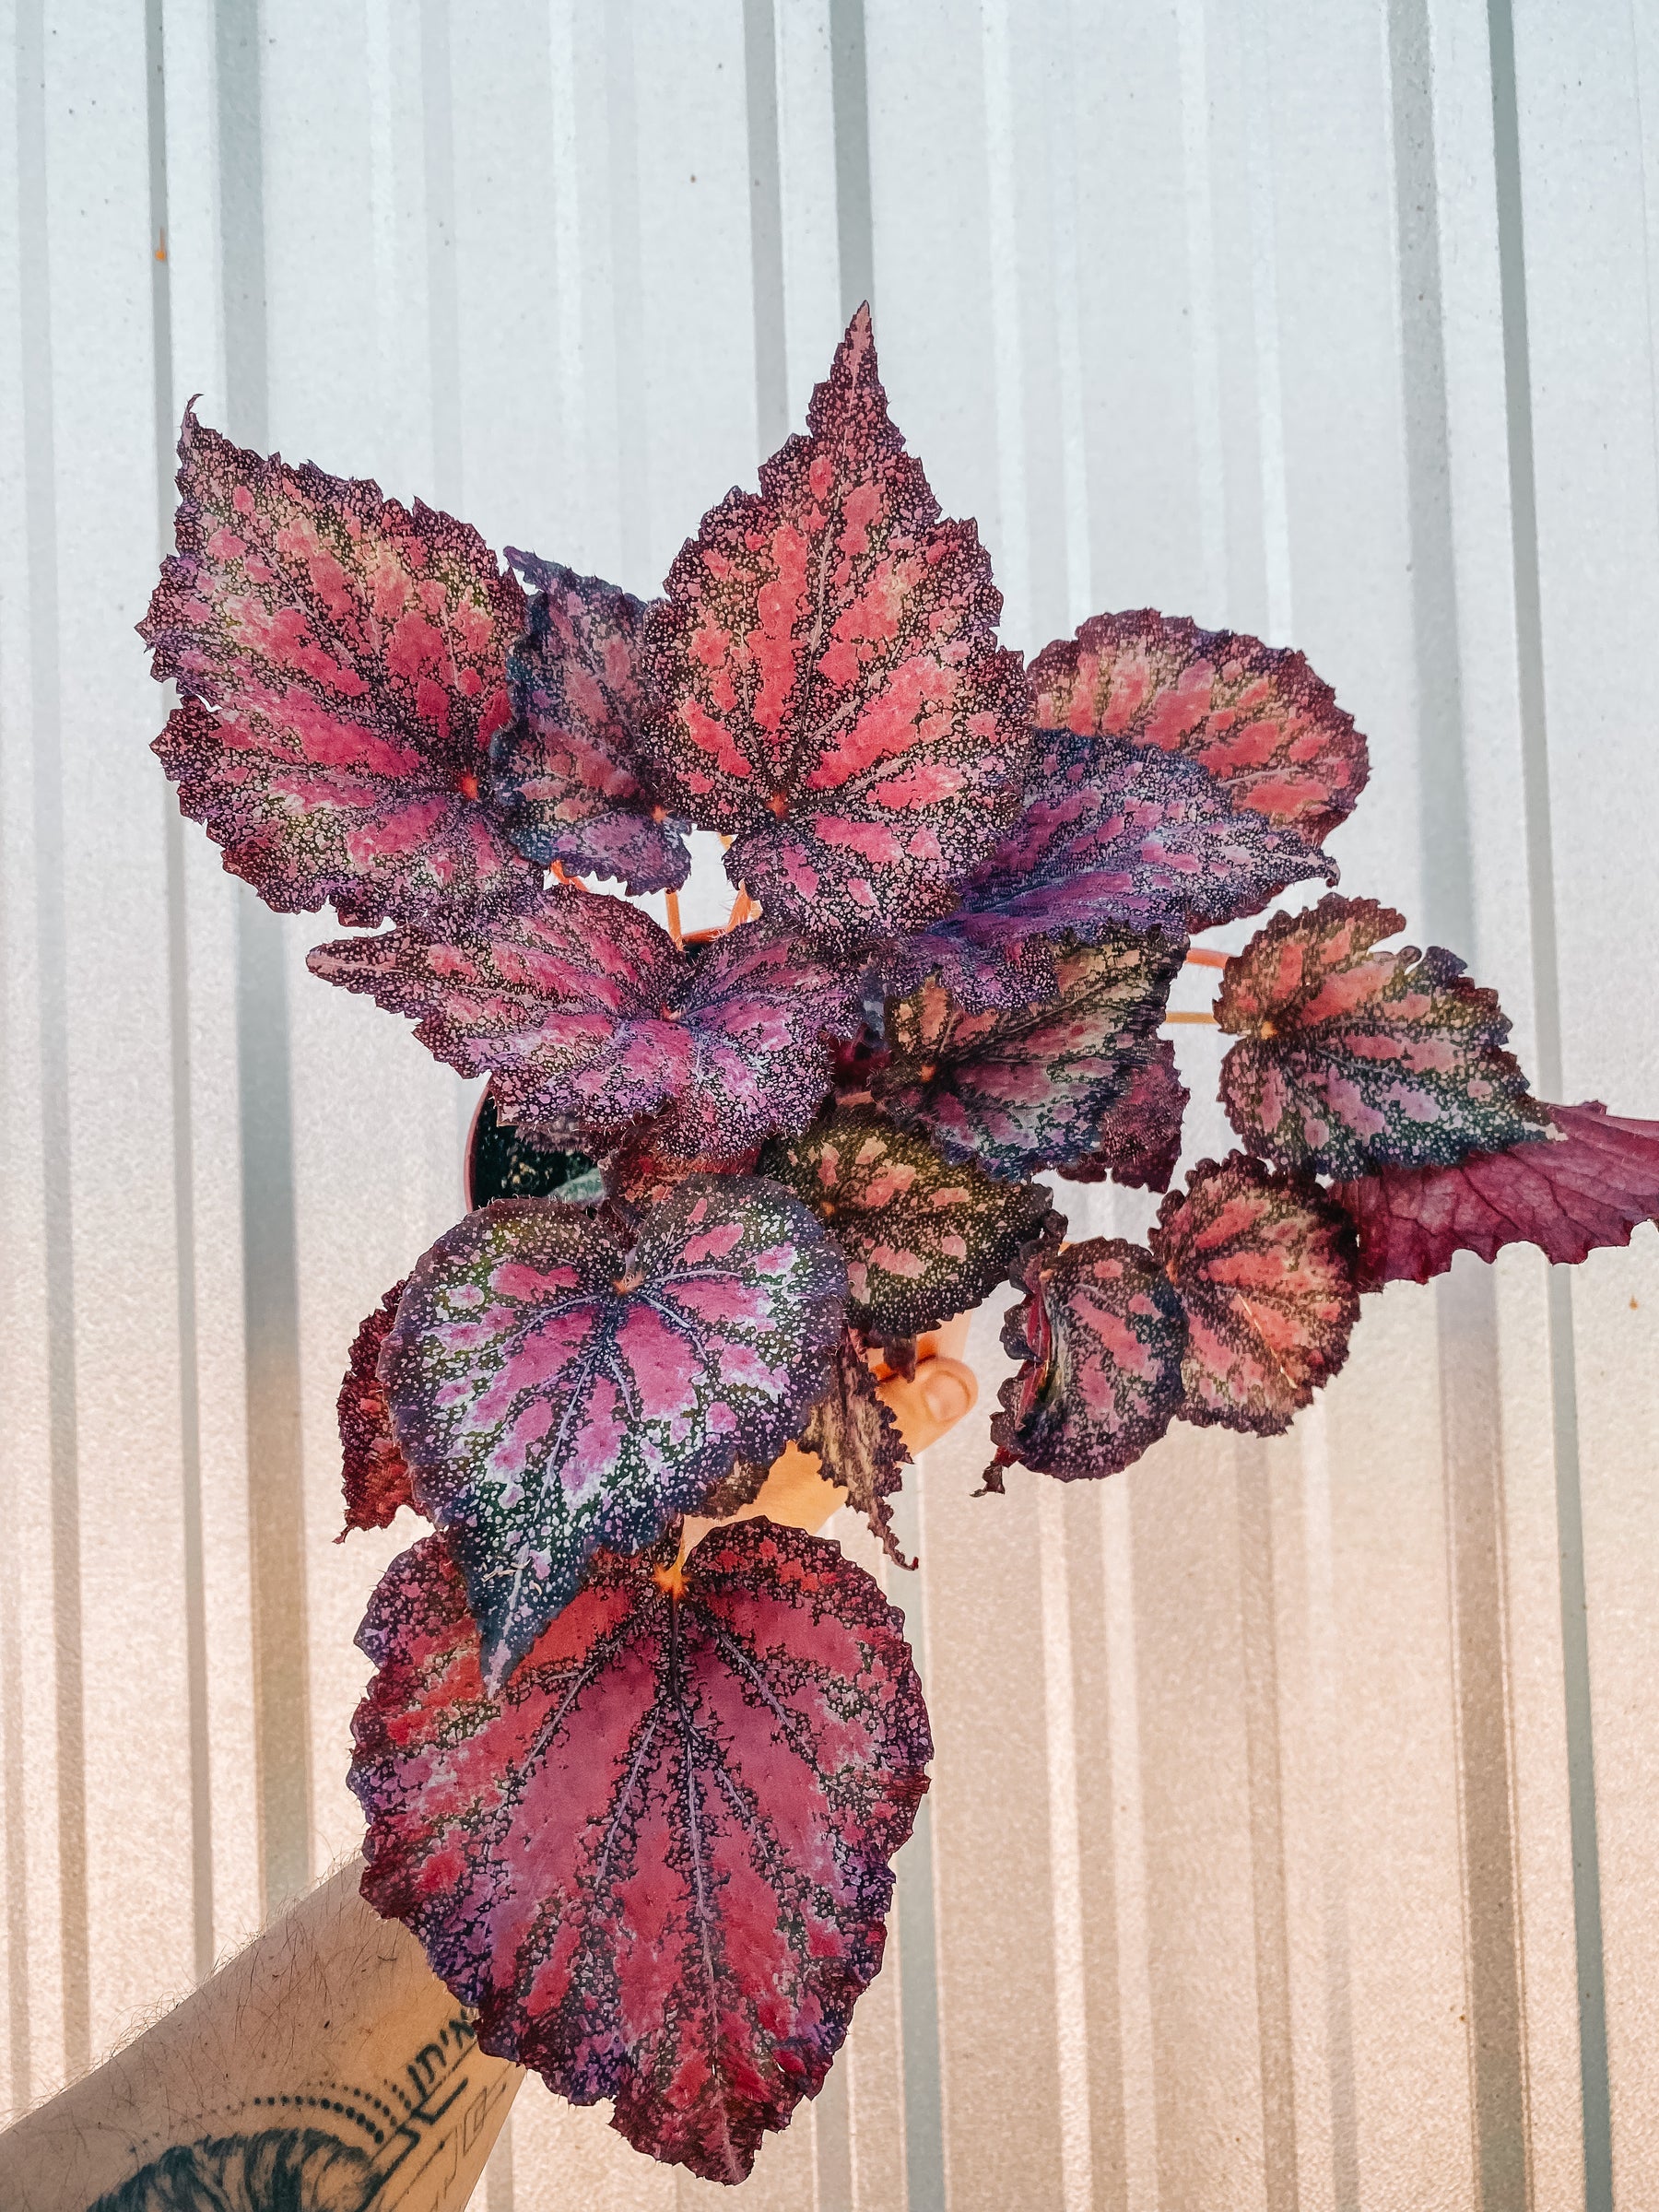 6" Begonia 'Harmony's Stained Glass'